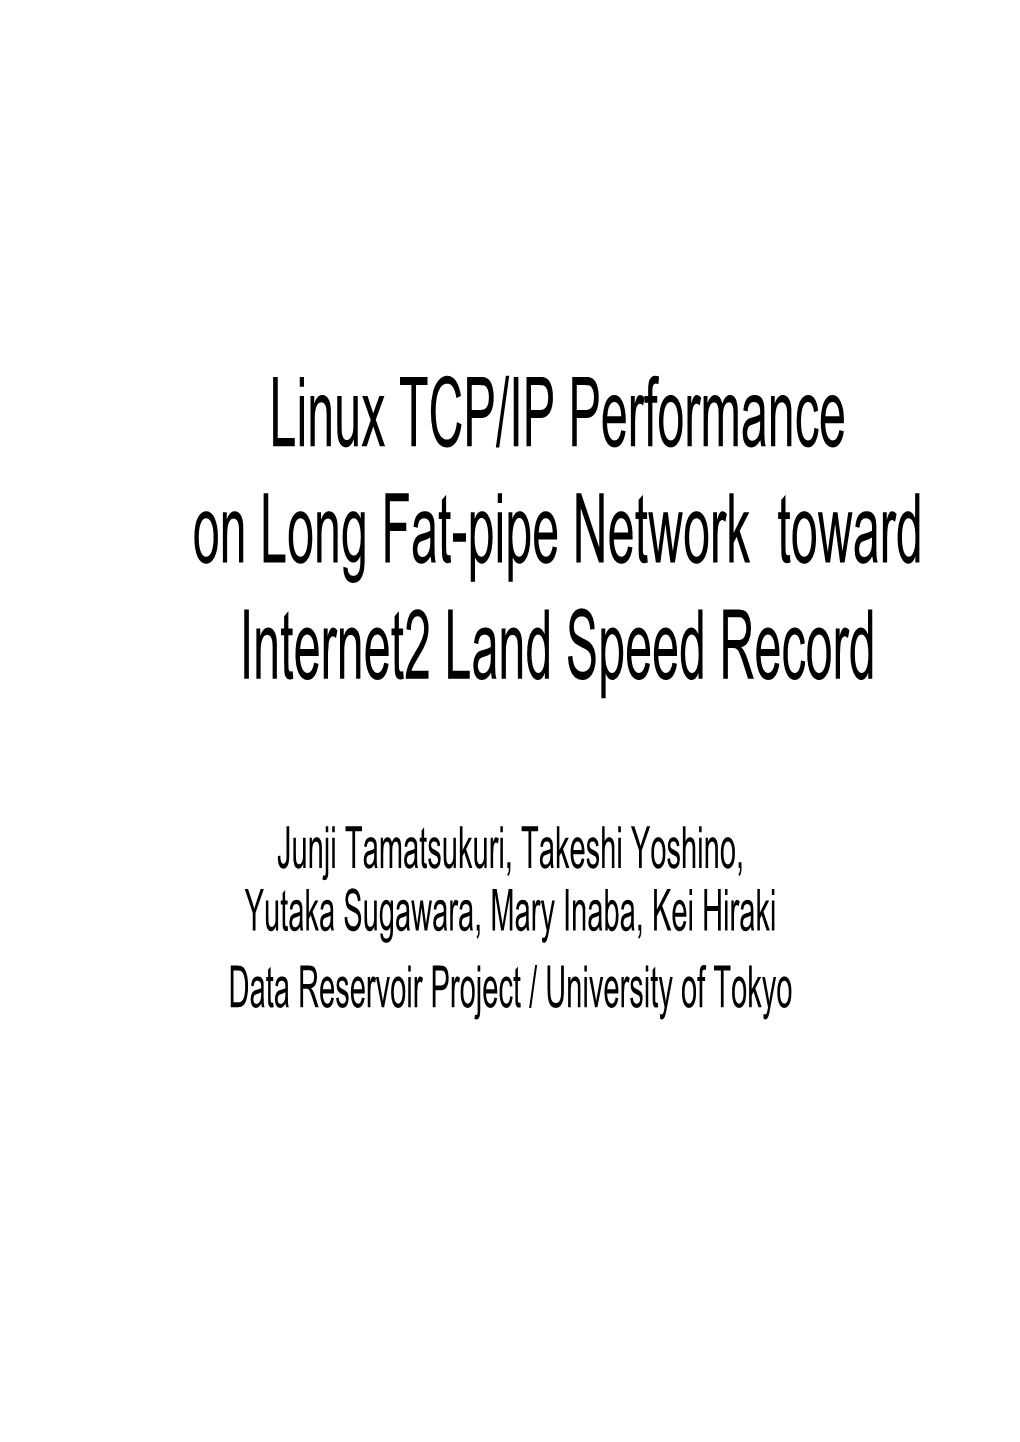 Linux TCP/IP Performance on Long Fat-Pipe Network Toward Internet2 Land Speed Record